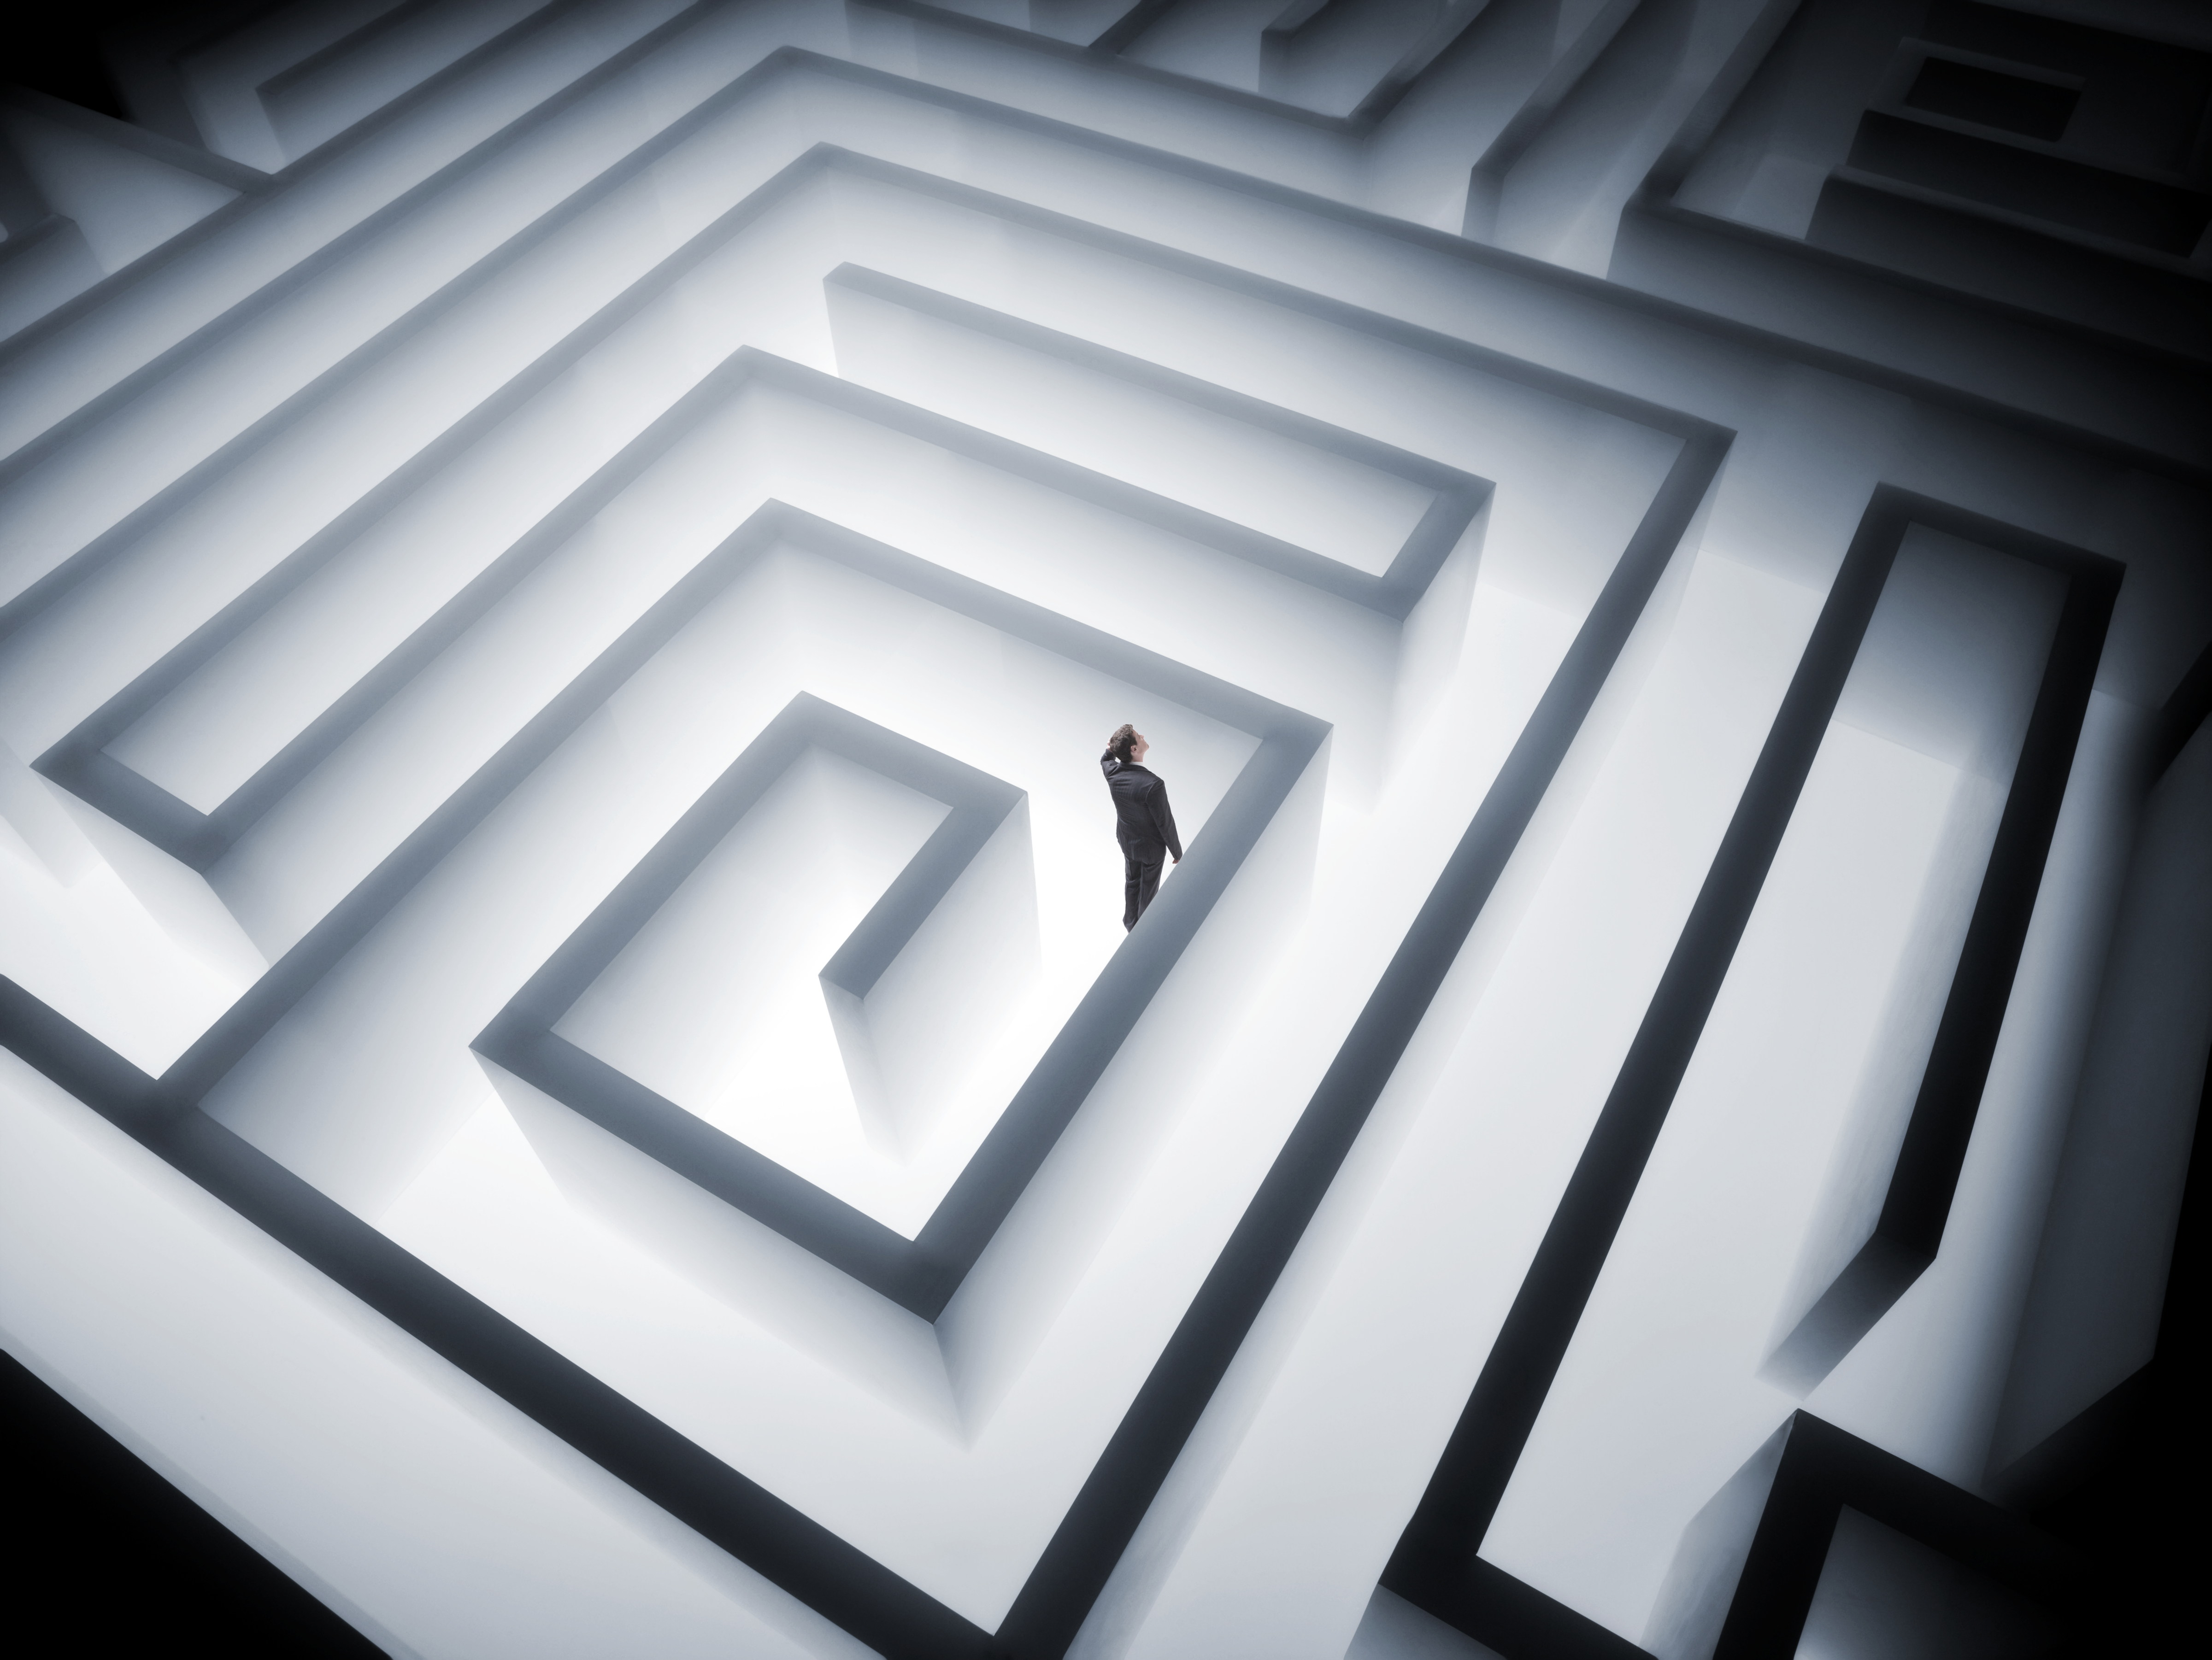 A man trying to find his way through a maze